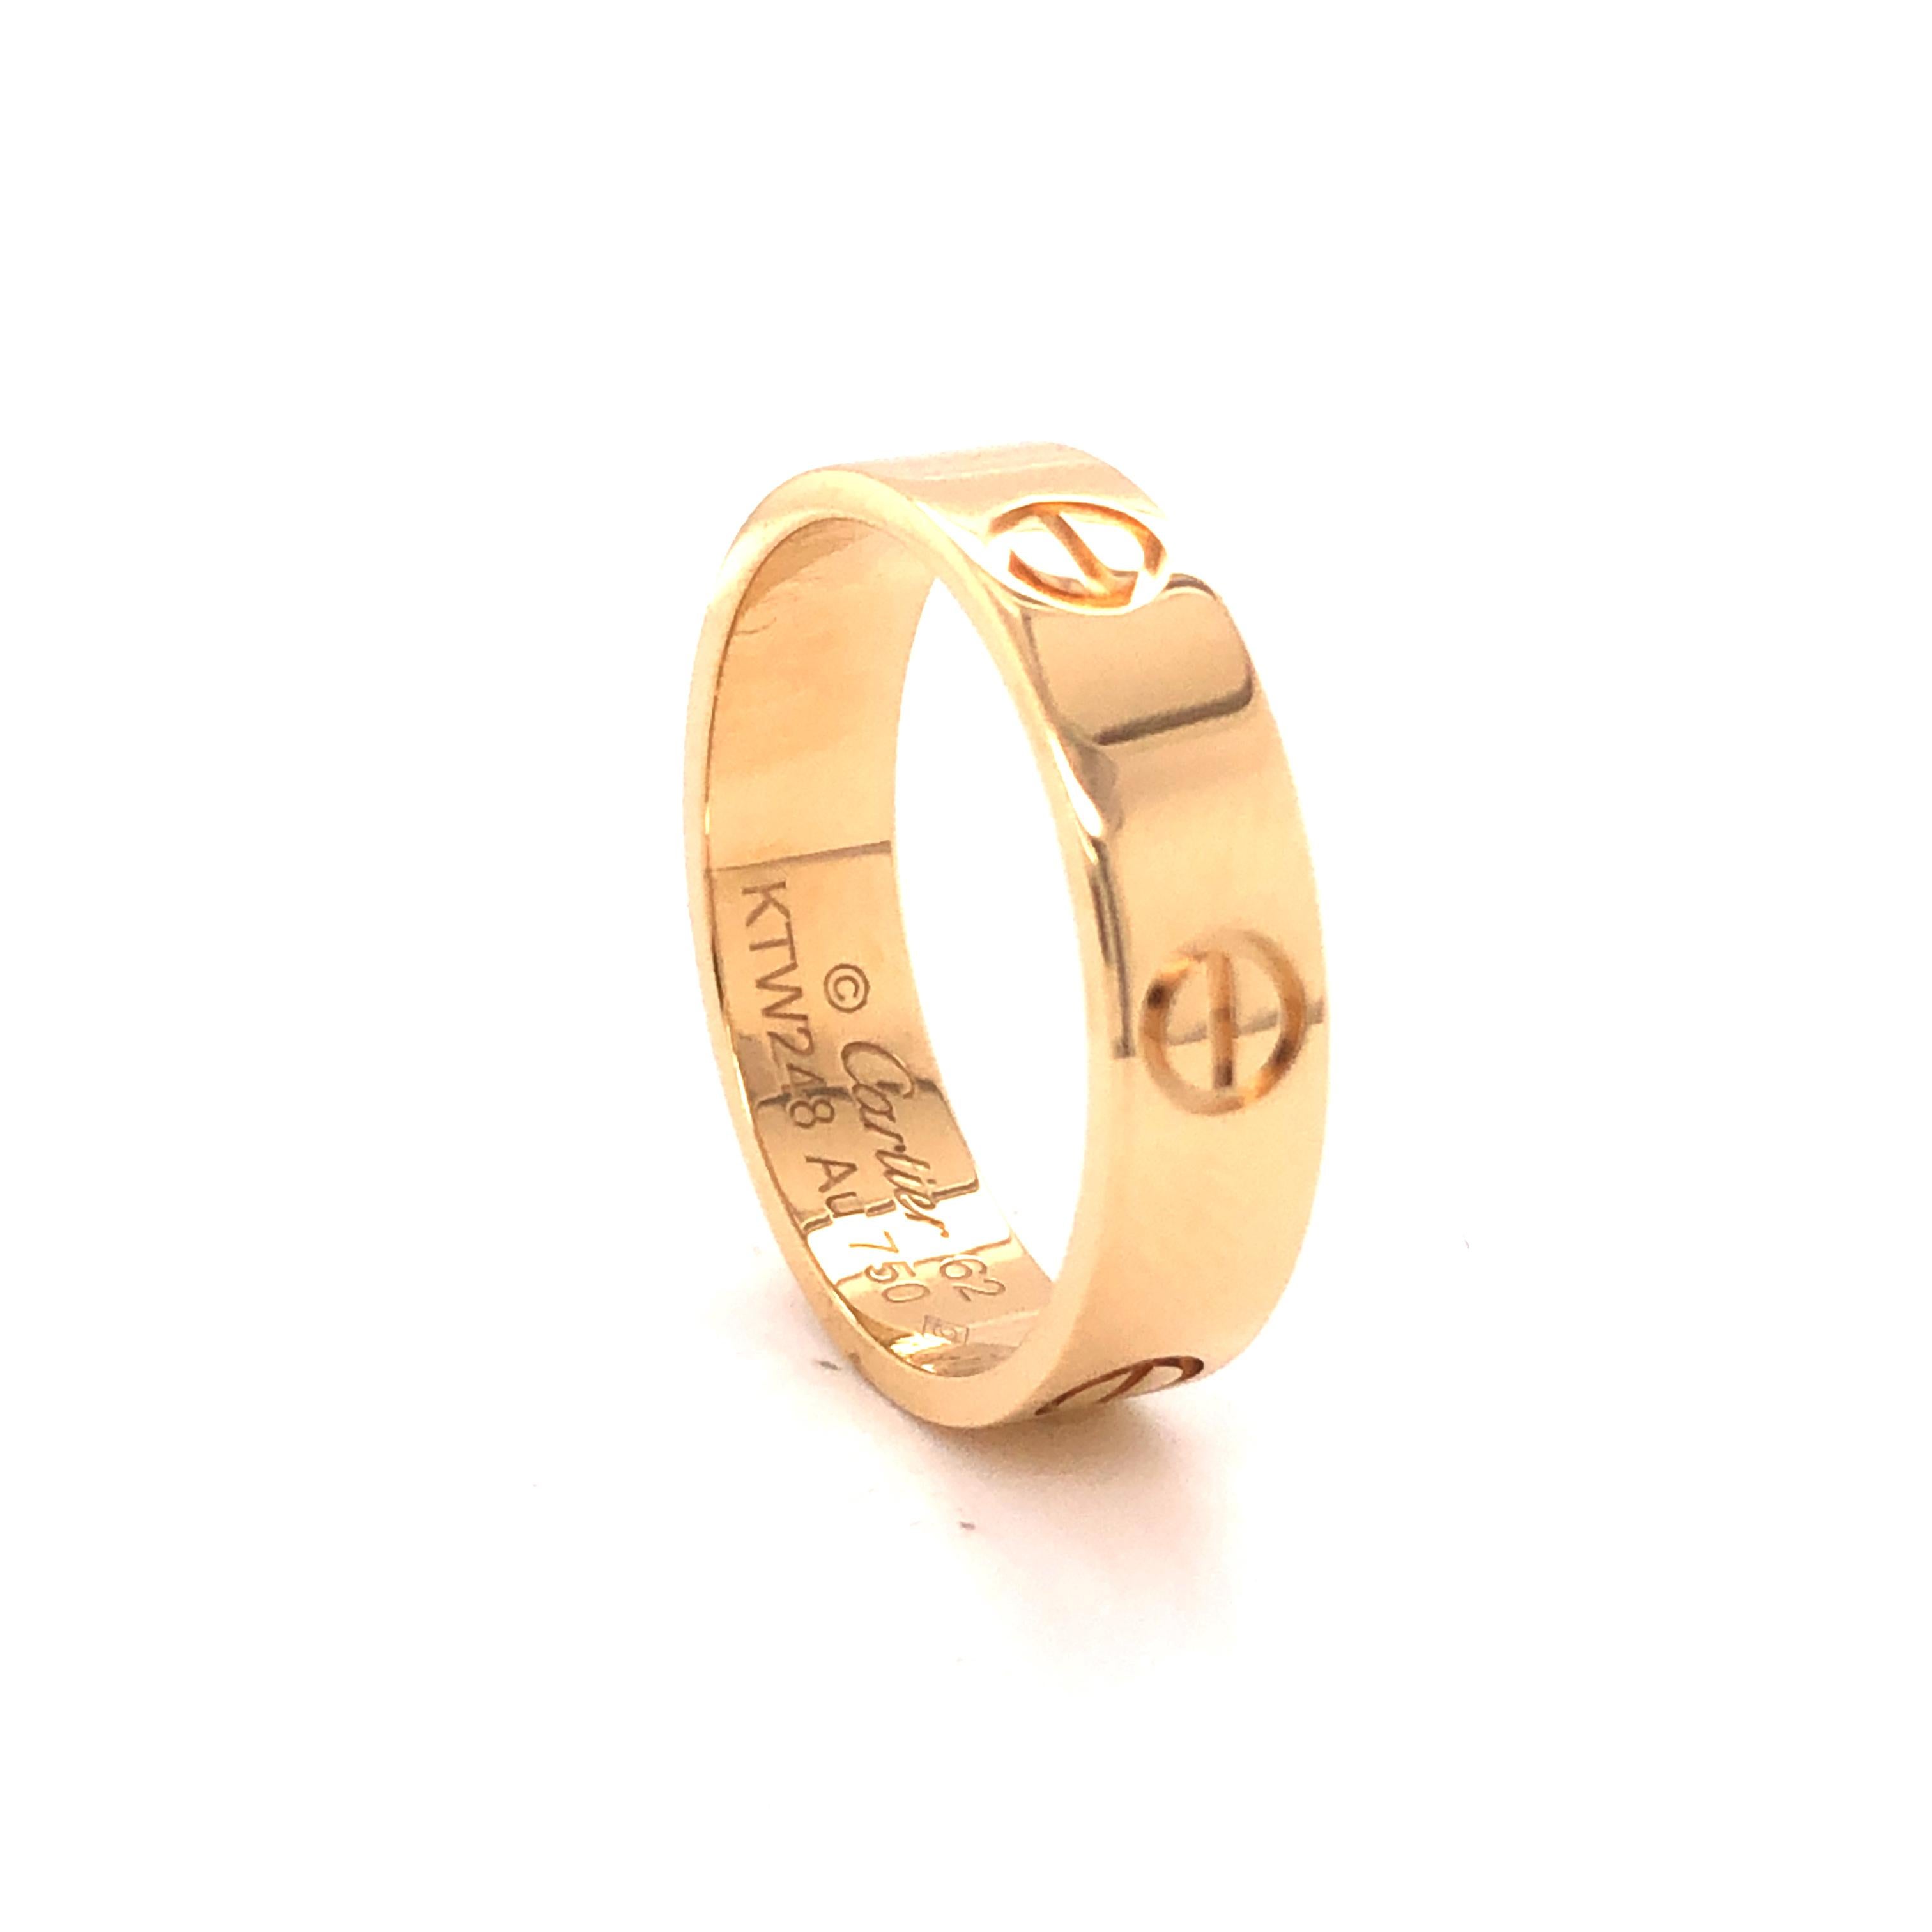 Cartier Love ring in 18K yellow gold. The ring is a size 62 U.S. size 10 with serial KTW---. Ring is fully hallmarked by designer 